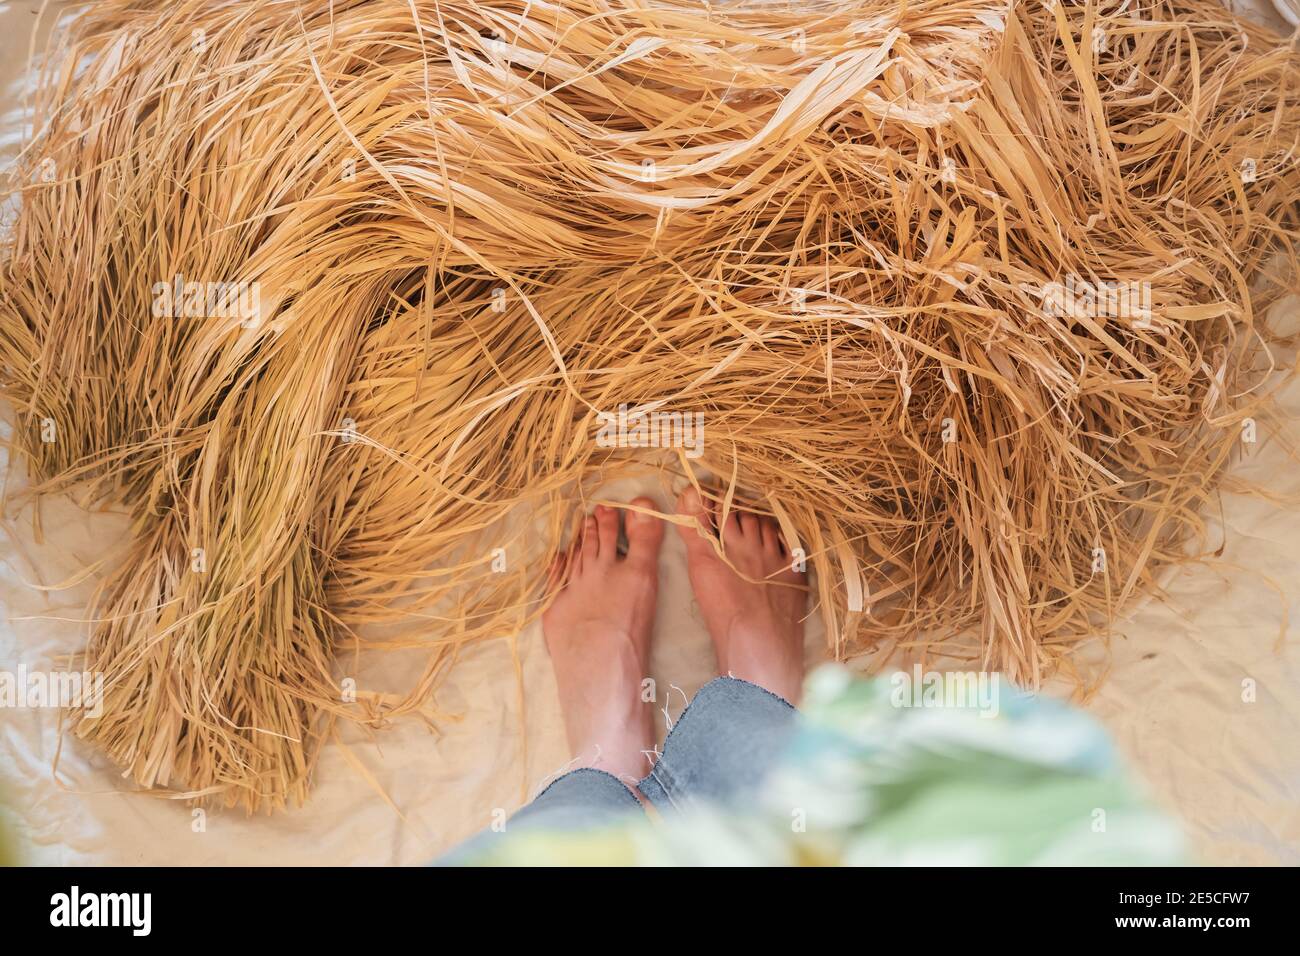 Female feet and natural palm raffia, top view. Zero waste package filler, natural handcraft materials Stock Photo